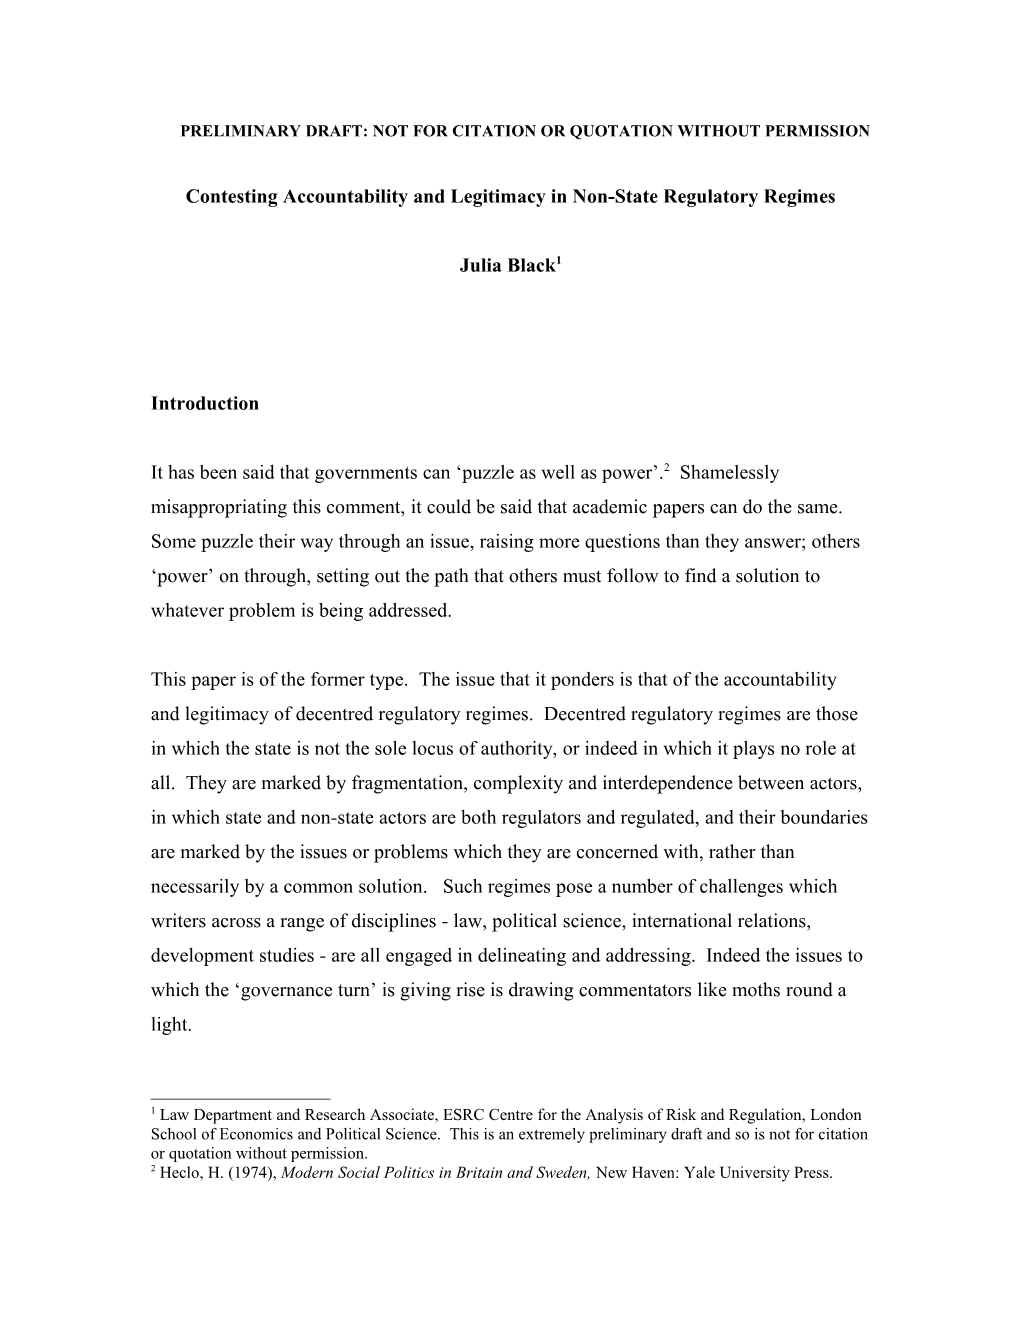 Accountability and Legitimacy As Relational Concepts